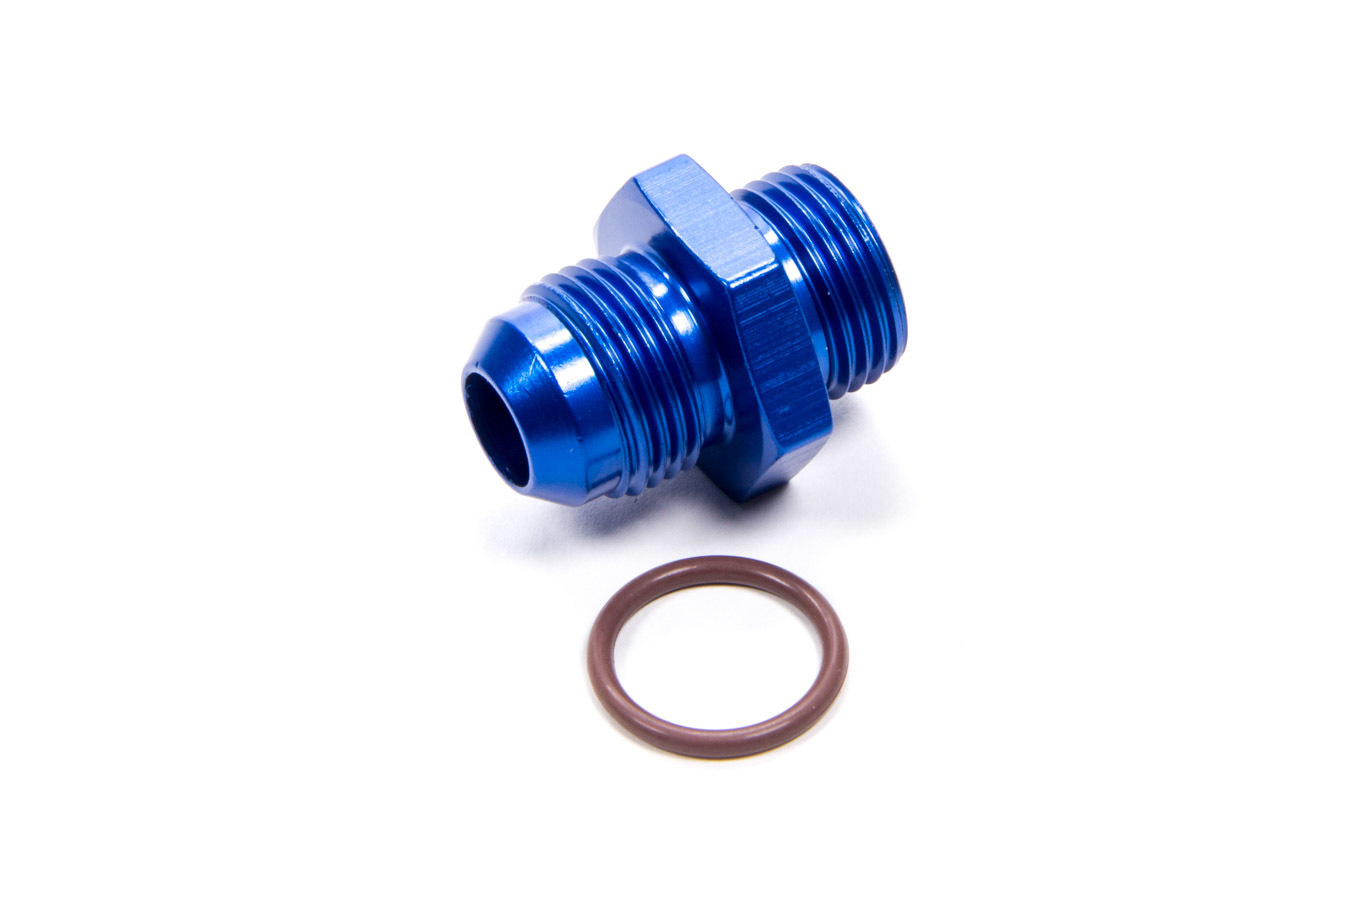 Fragola 495103 Fitting, Adapter, Straight, 8 AN Male to 8 AN Male O-Ring, Aluminum, Blue Anodized, Each